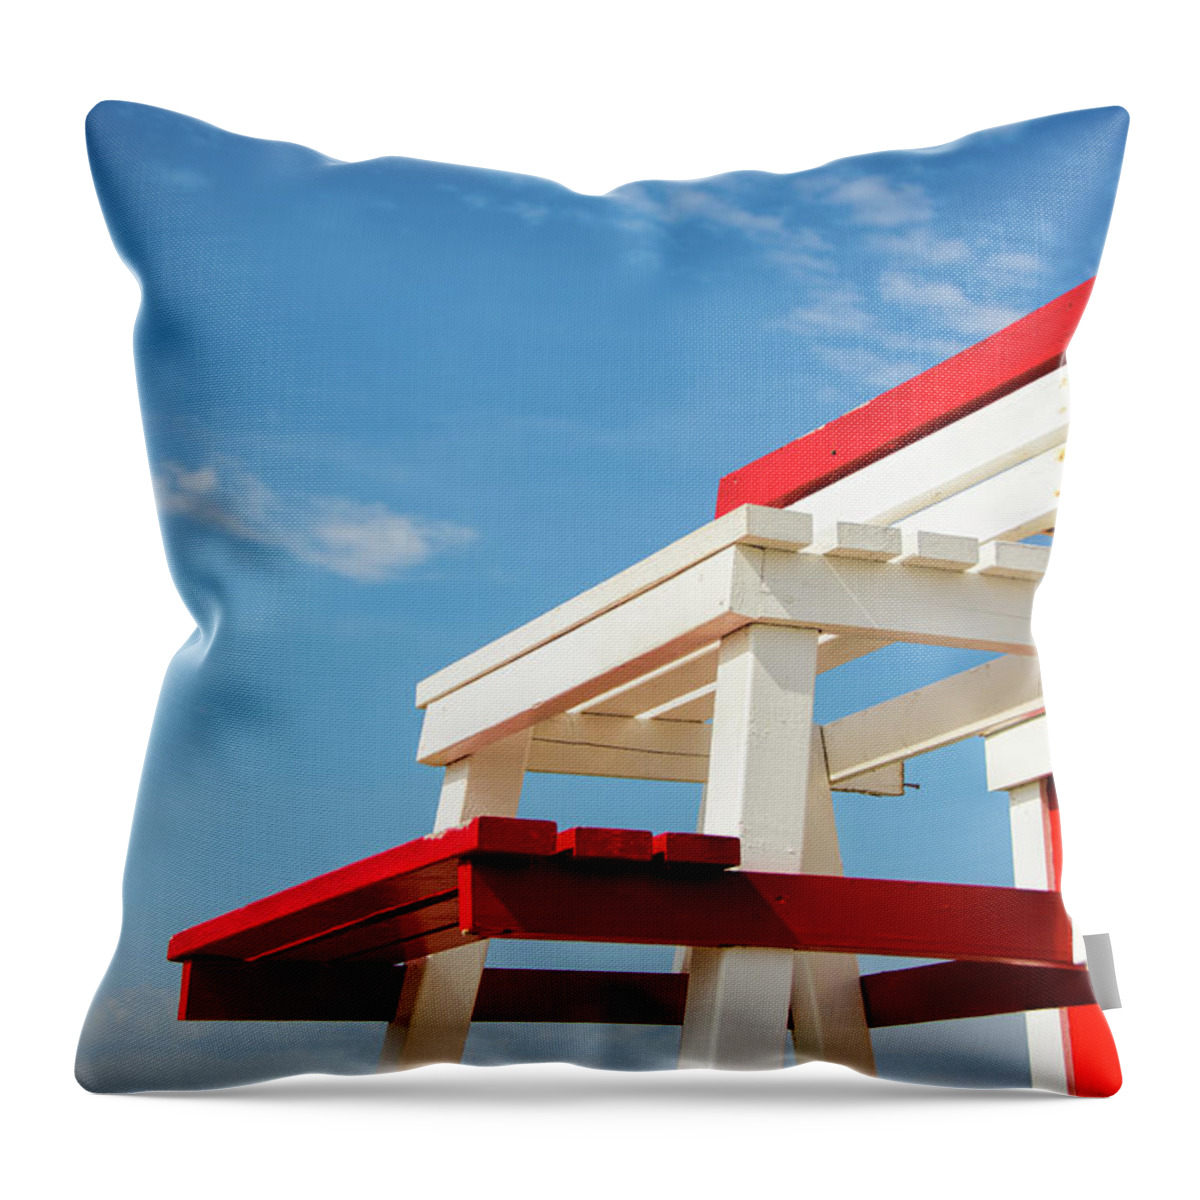 Prince Edward Island Throw Pillow featuring the photograph Lifeguard Station by Marion McCristall